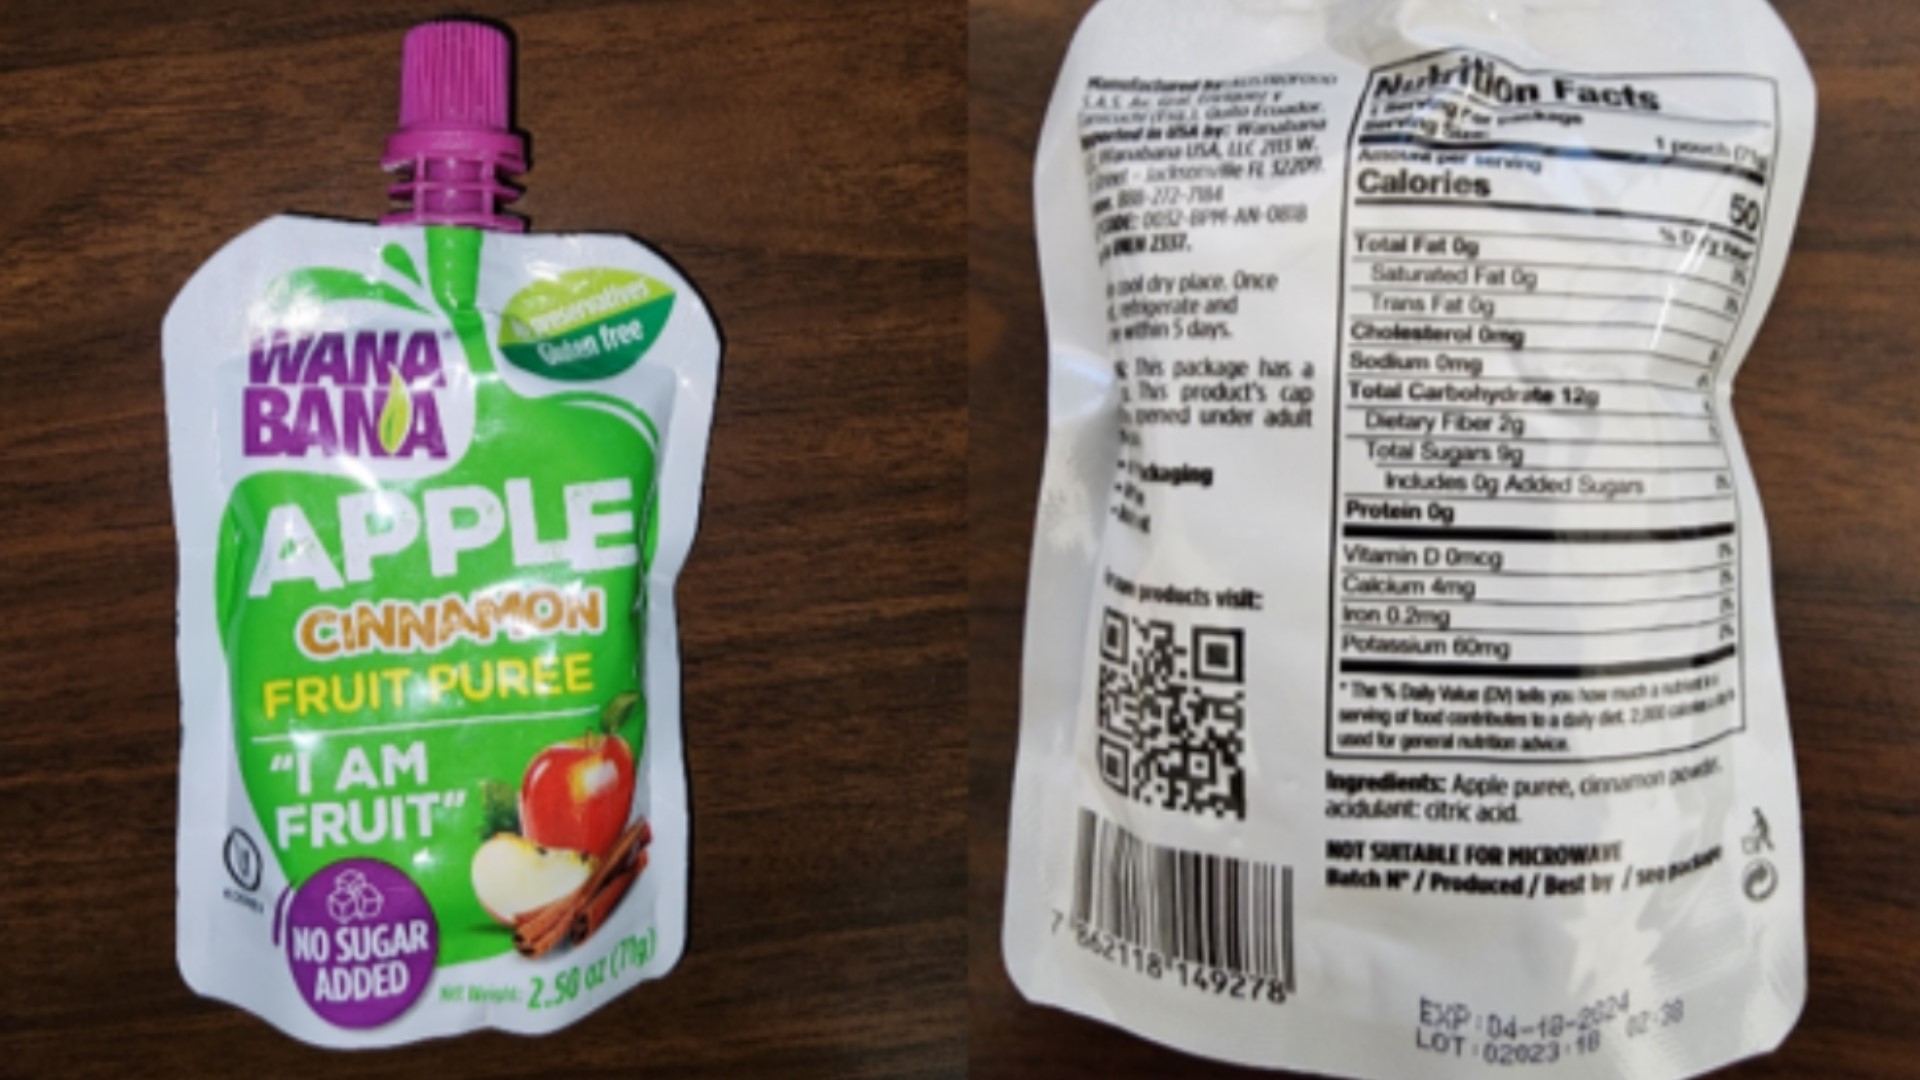 The fruit puree pouches were sold nationwide at several major retailers including Sam's Club, Dollar Tree and Amazon.